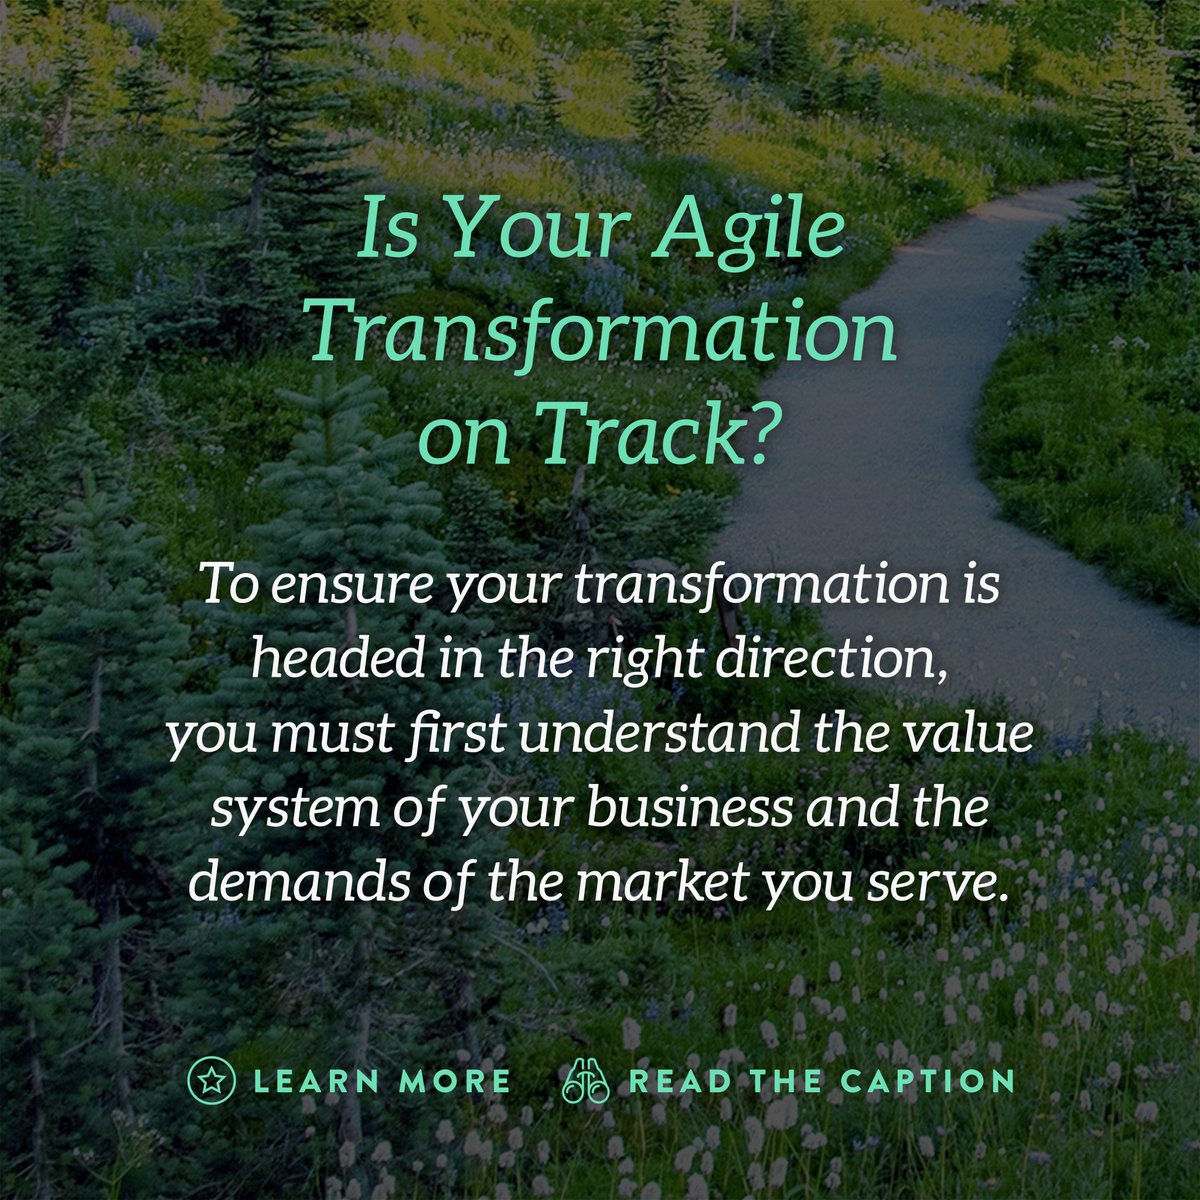 Some companies value predictability. Others adaptability.

Some companies serve markets with convergent requirements. Others serve markets with emergent requirements.

This means that every #AgileTransformation won't look the same.

Understanding what your company values and the…